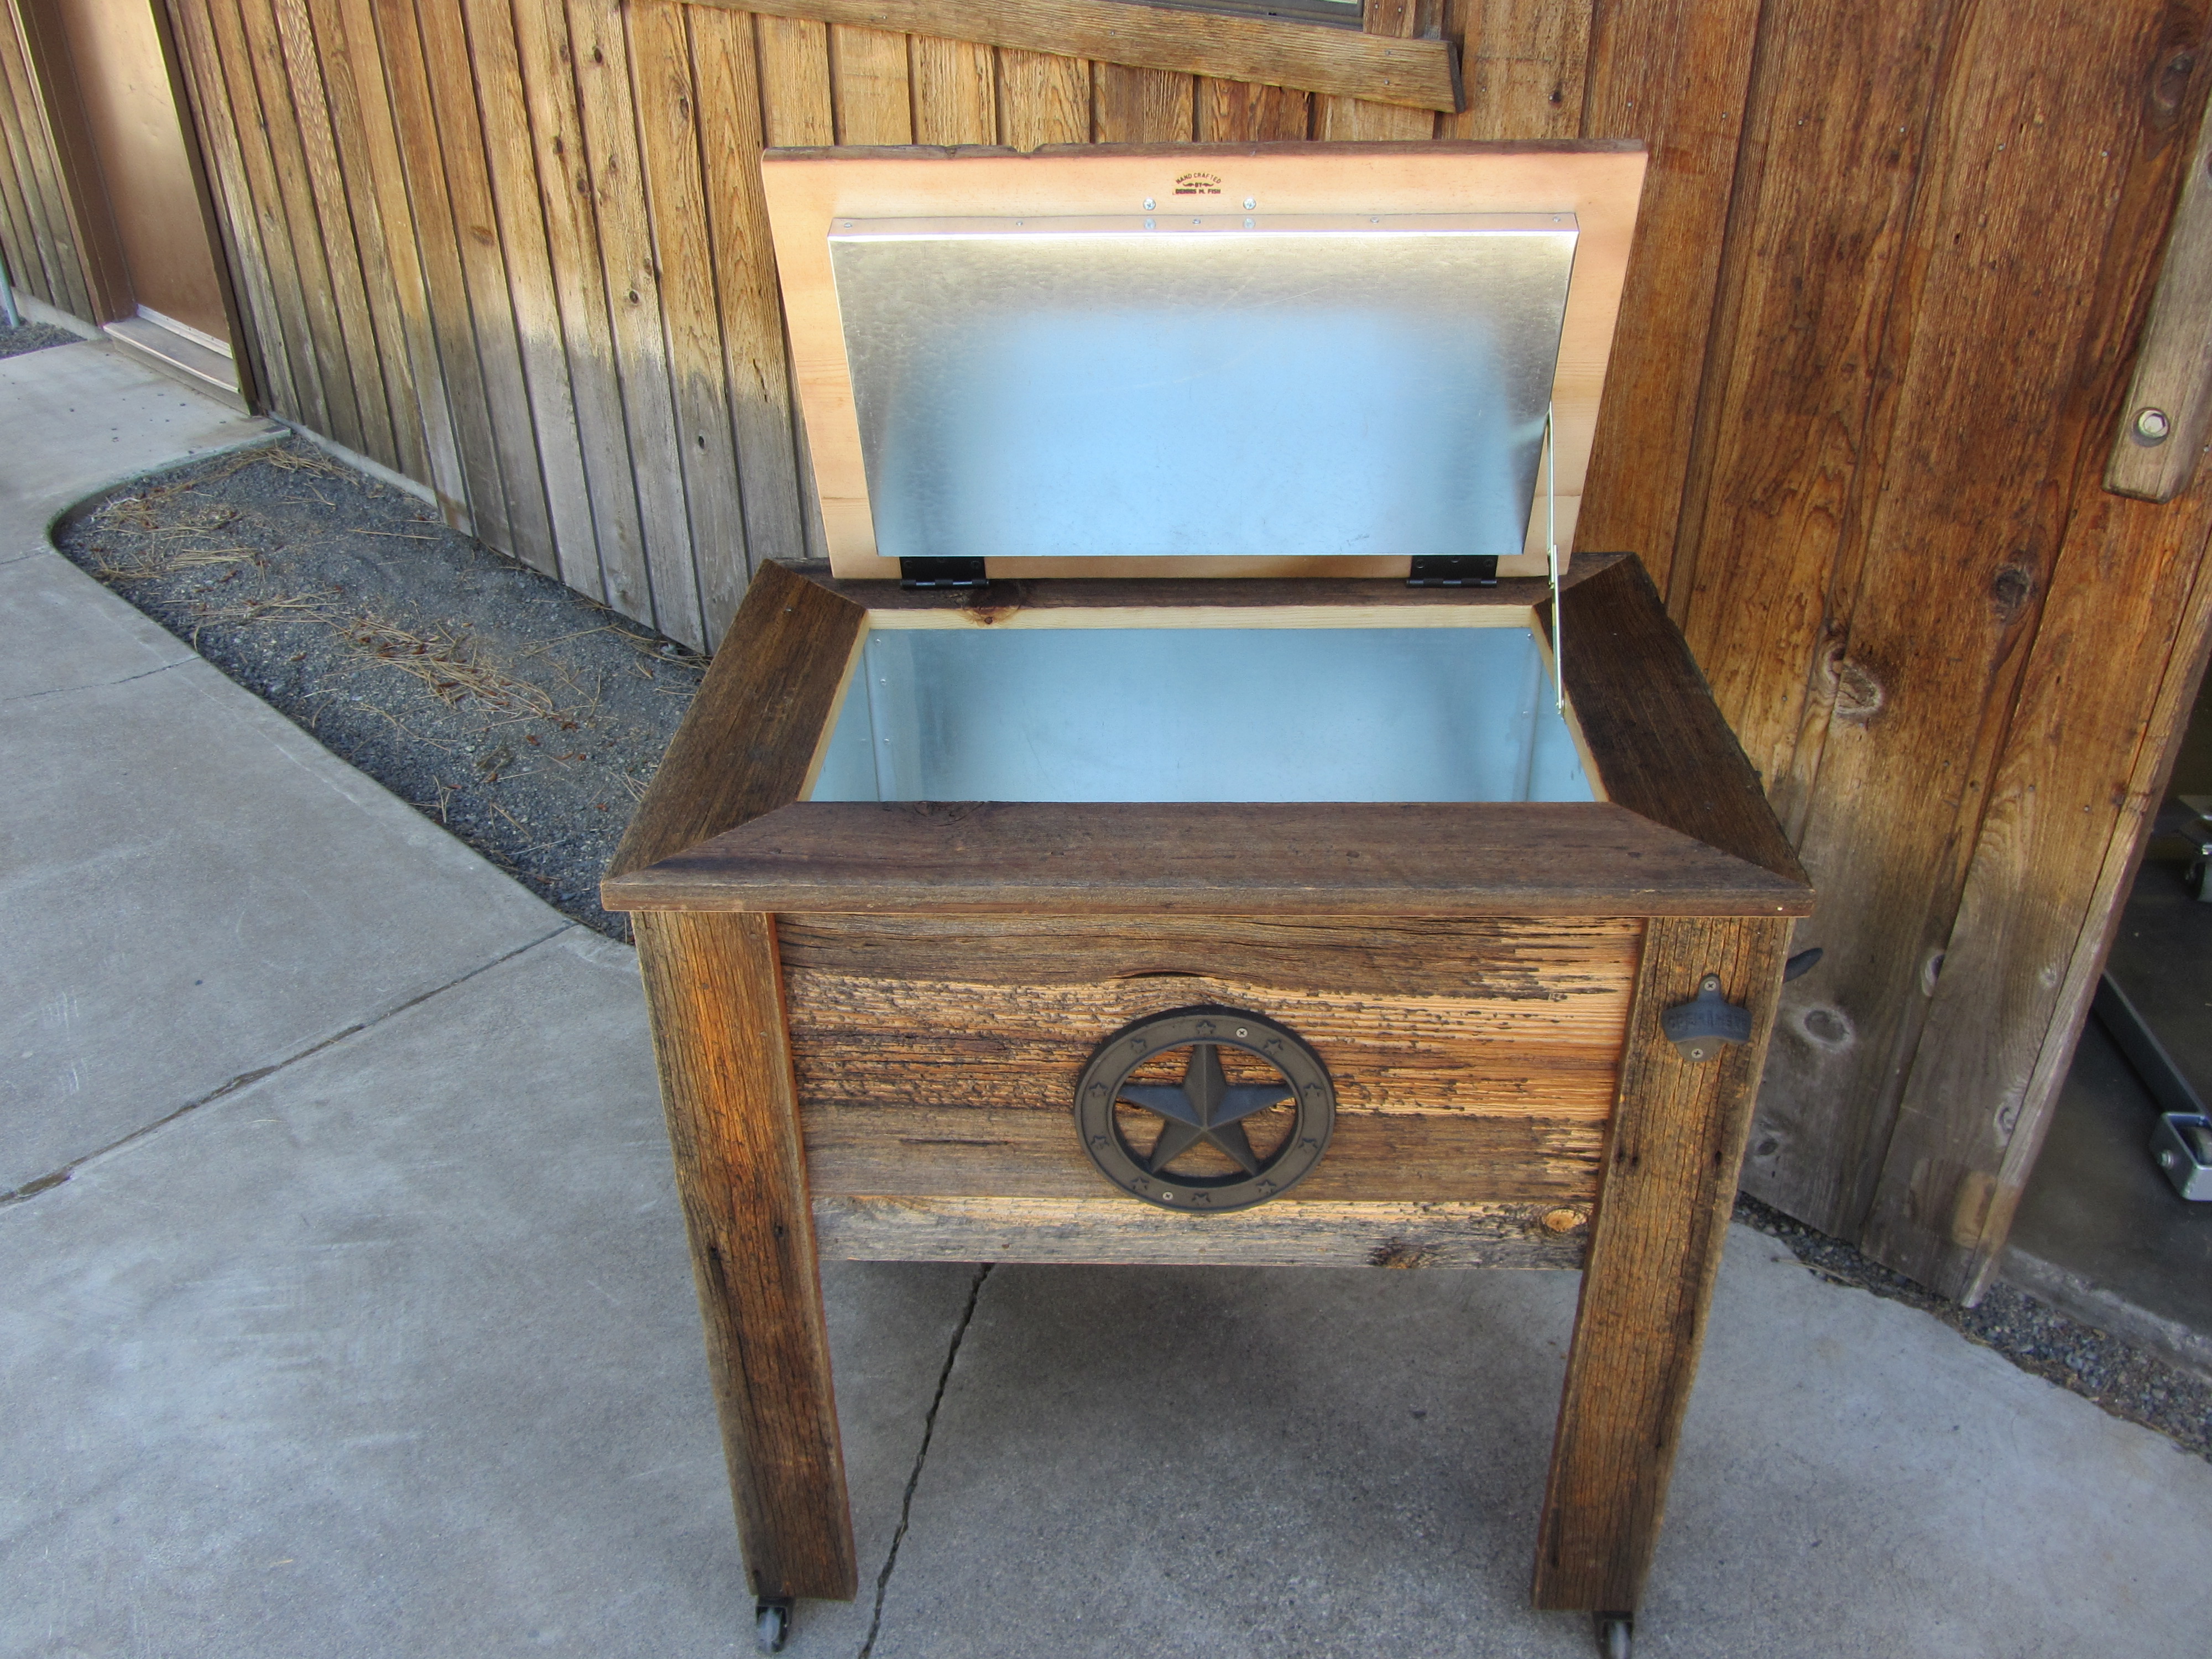 Woodworking cowboy ice chest plans PDF Free Download